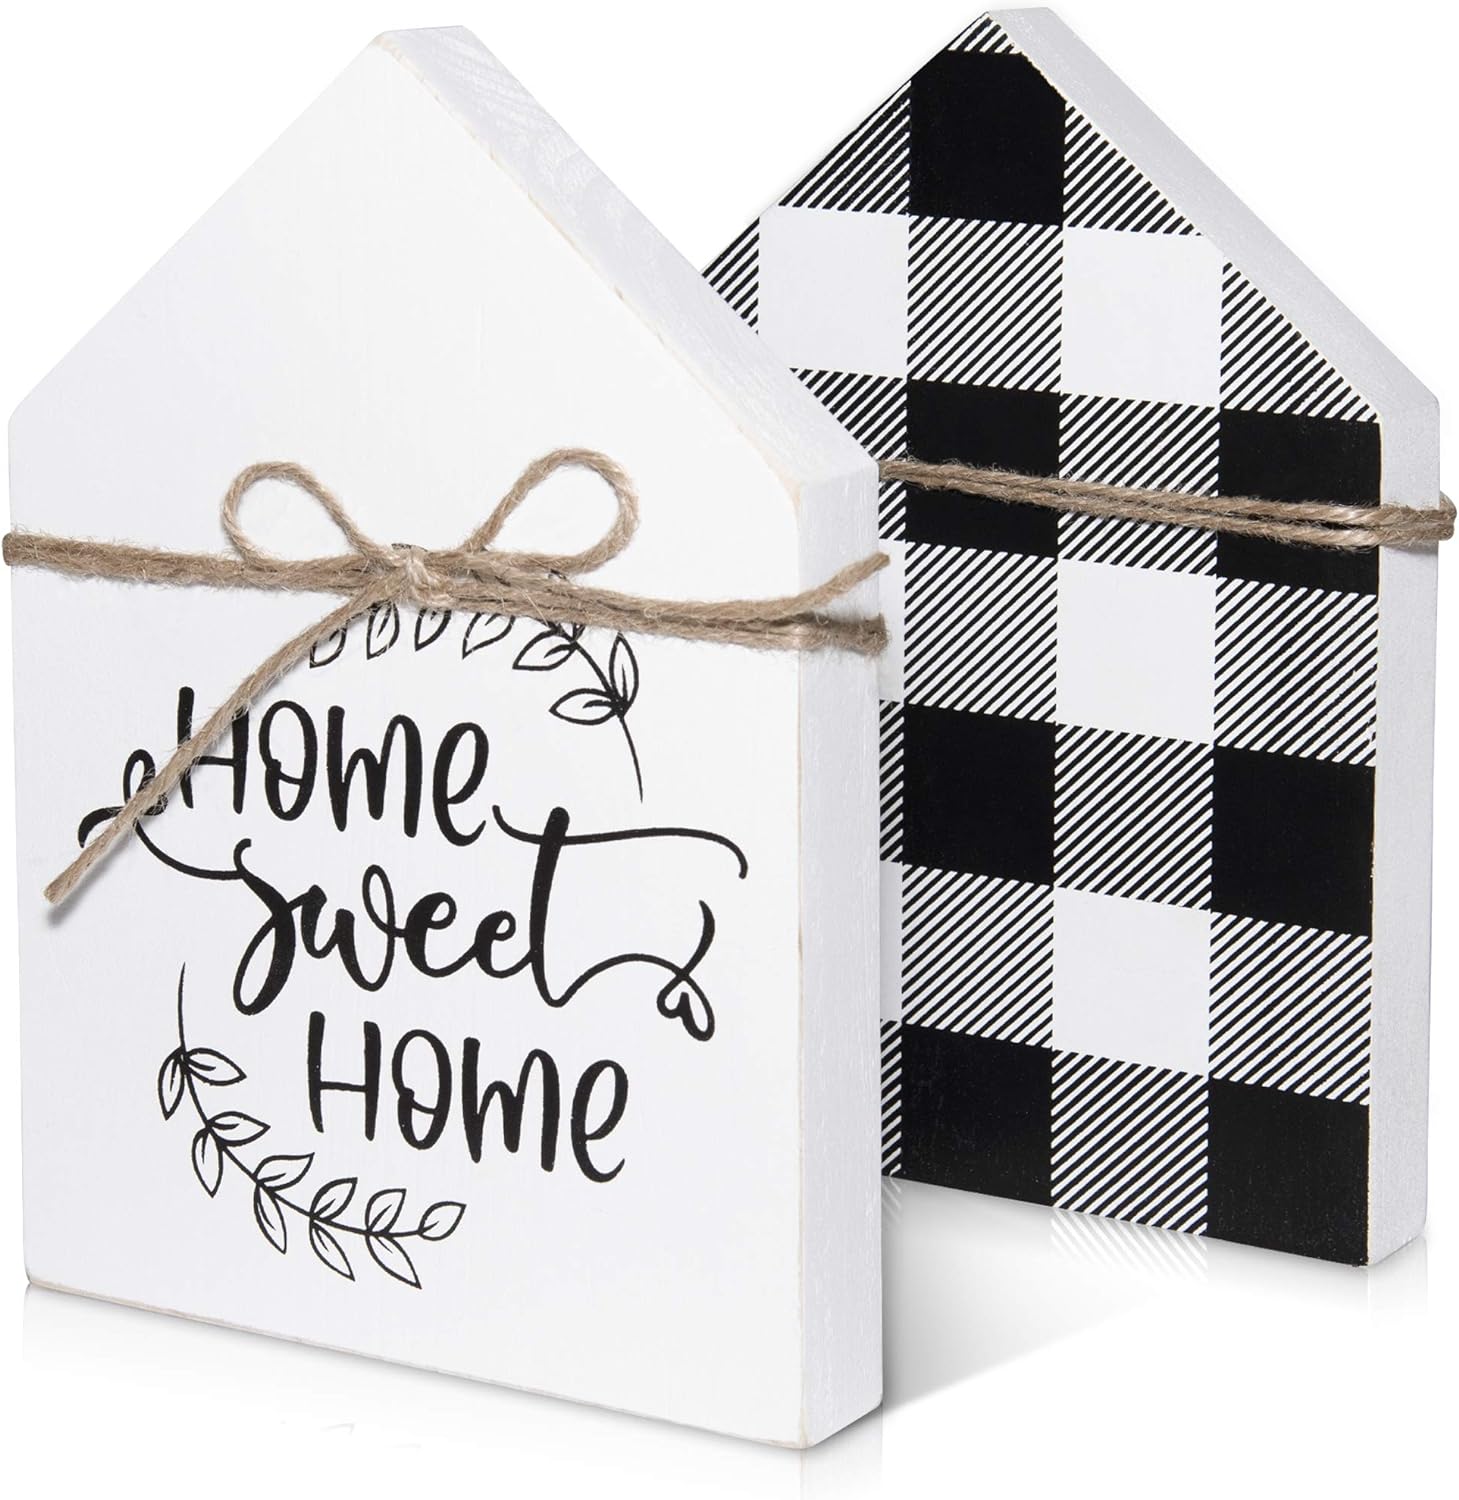 farmhouse wood sign with a black and white buffalo check pattern painted on one side and a home sweet home message painted on the other side